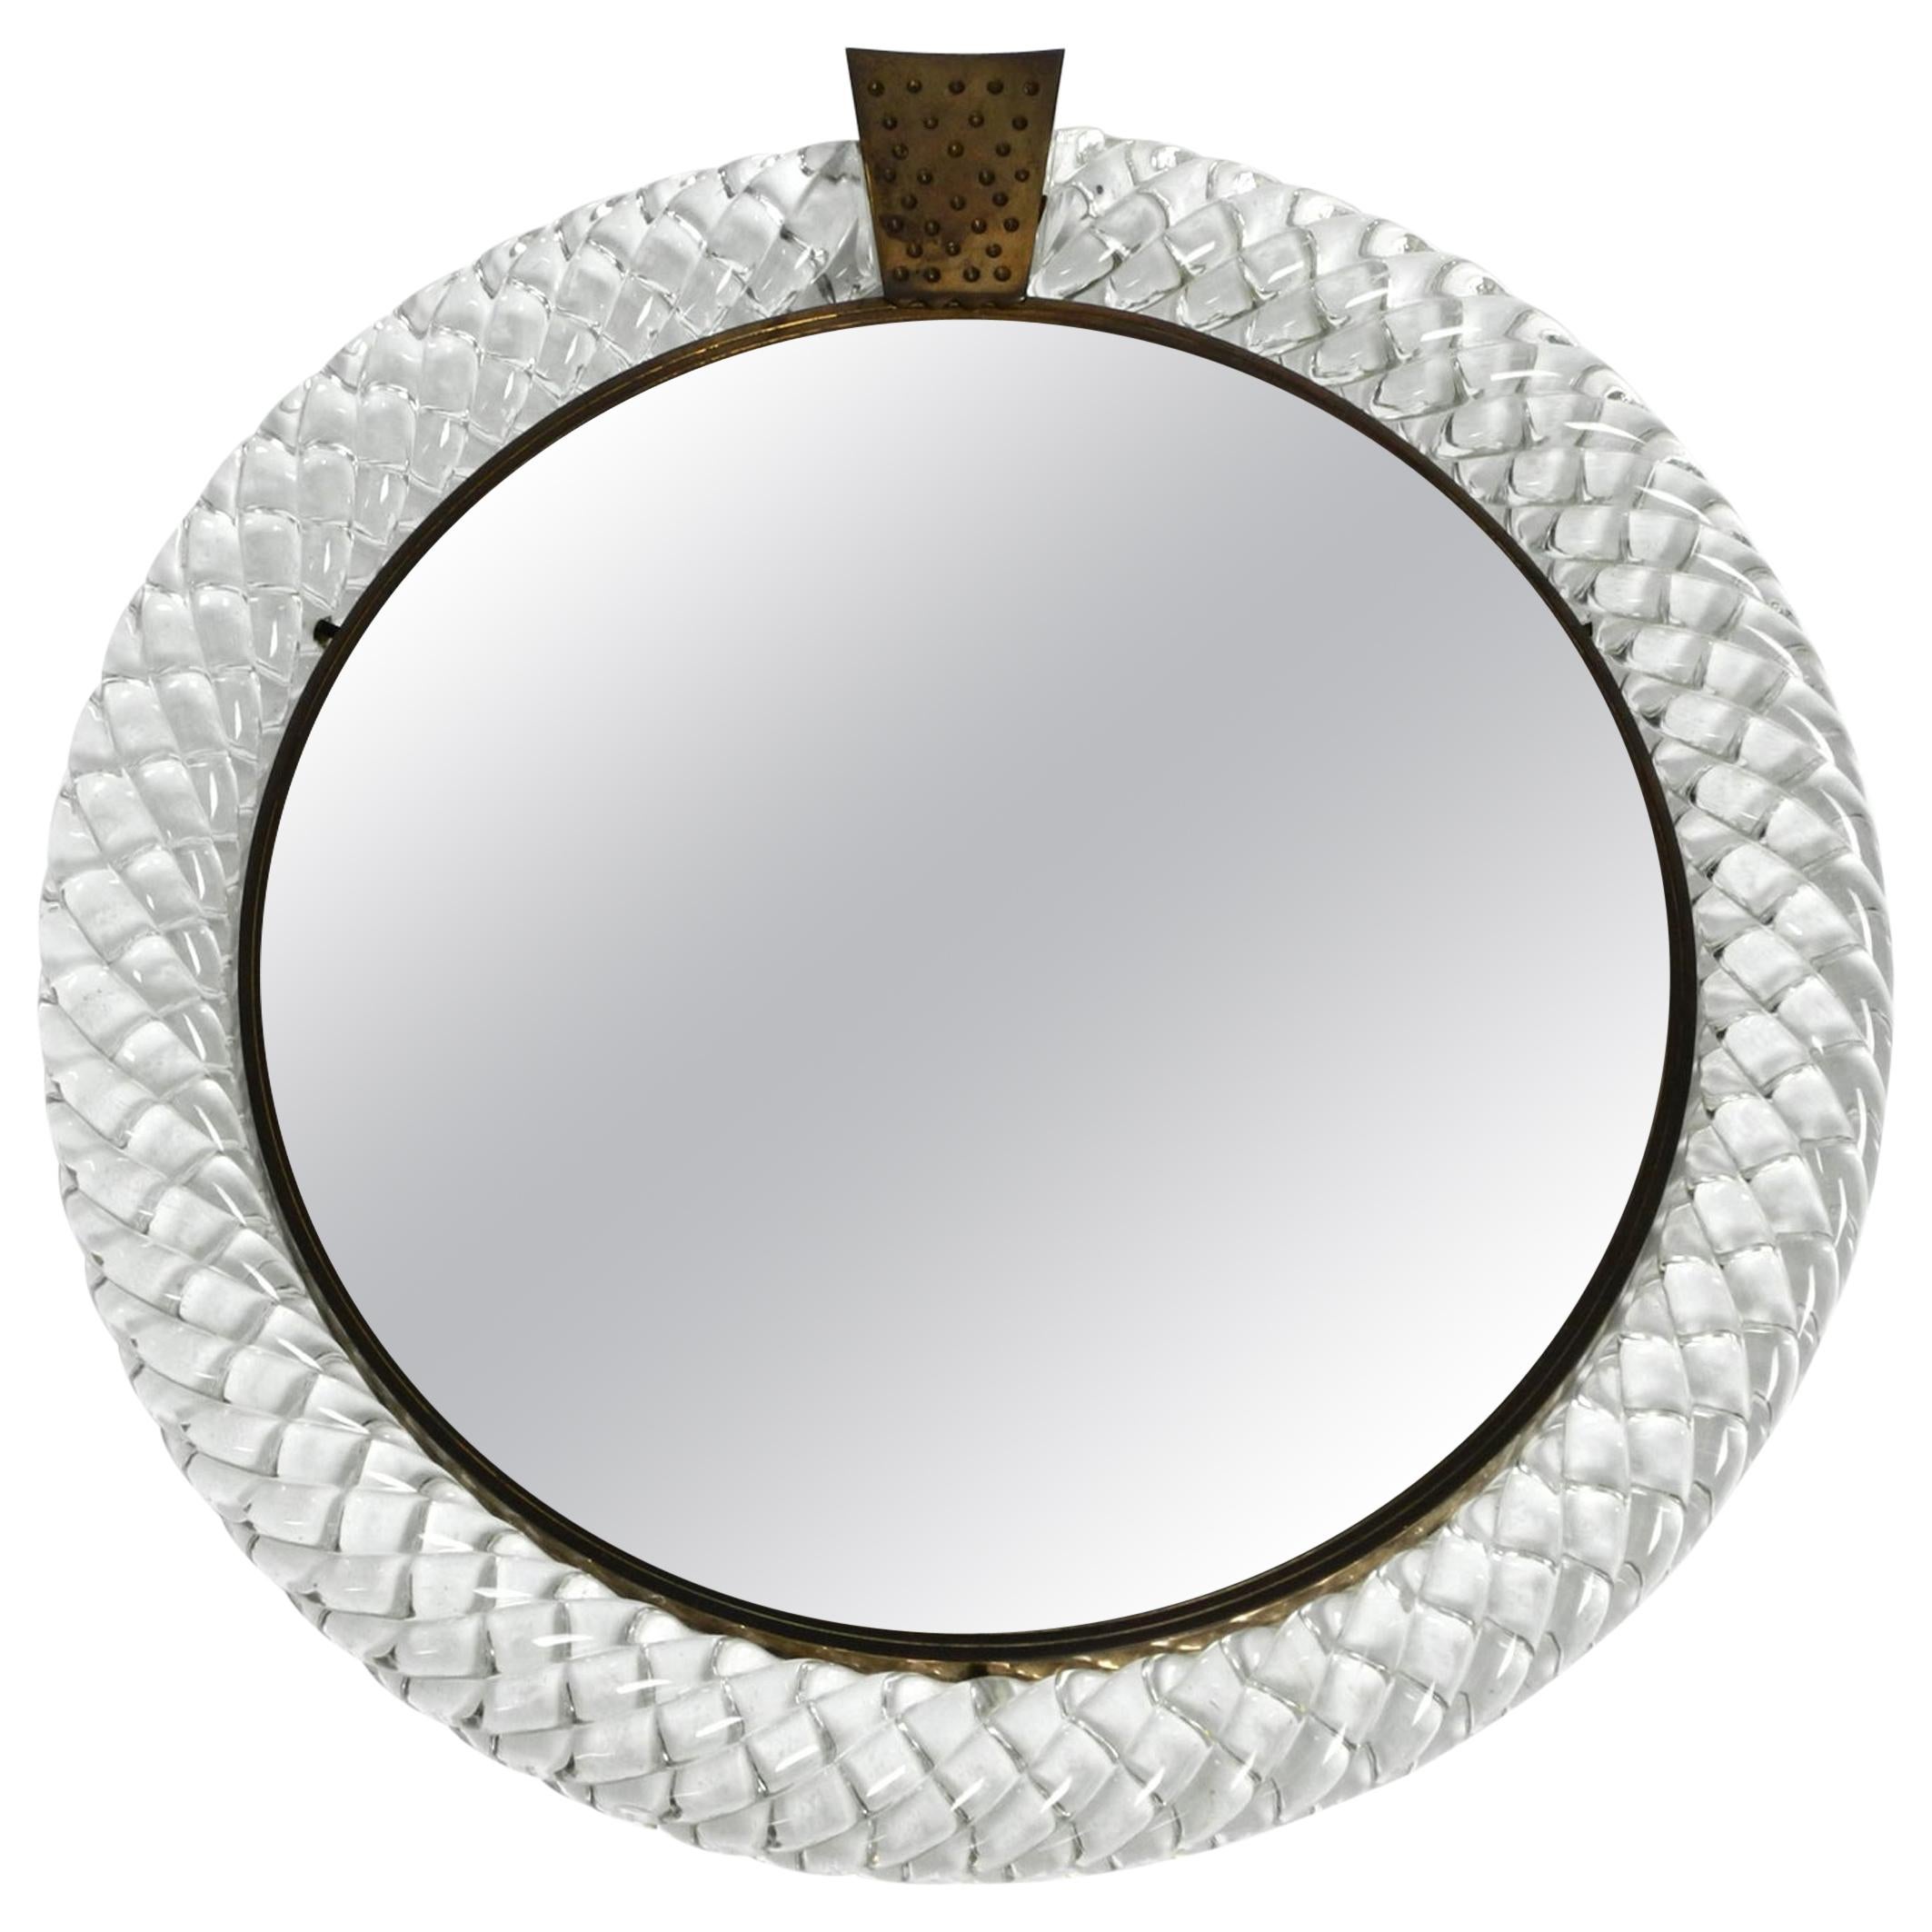 Beautiful 1960s Wall Mirror with Heavy Murano Glass Frame by Barovier & Toso